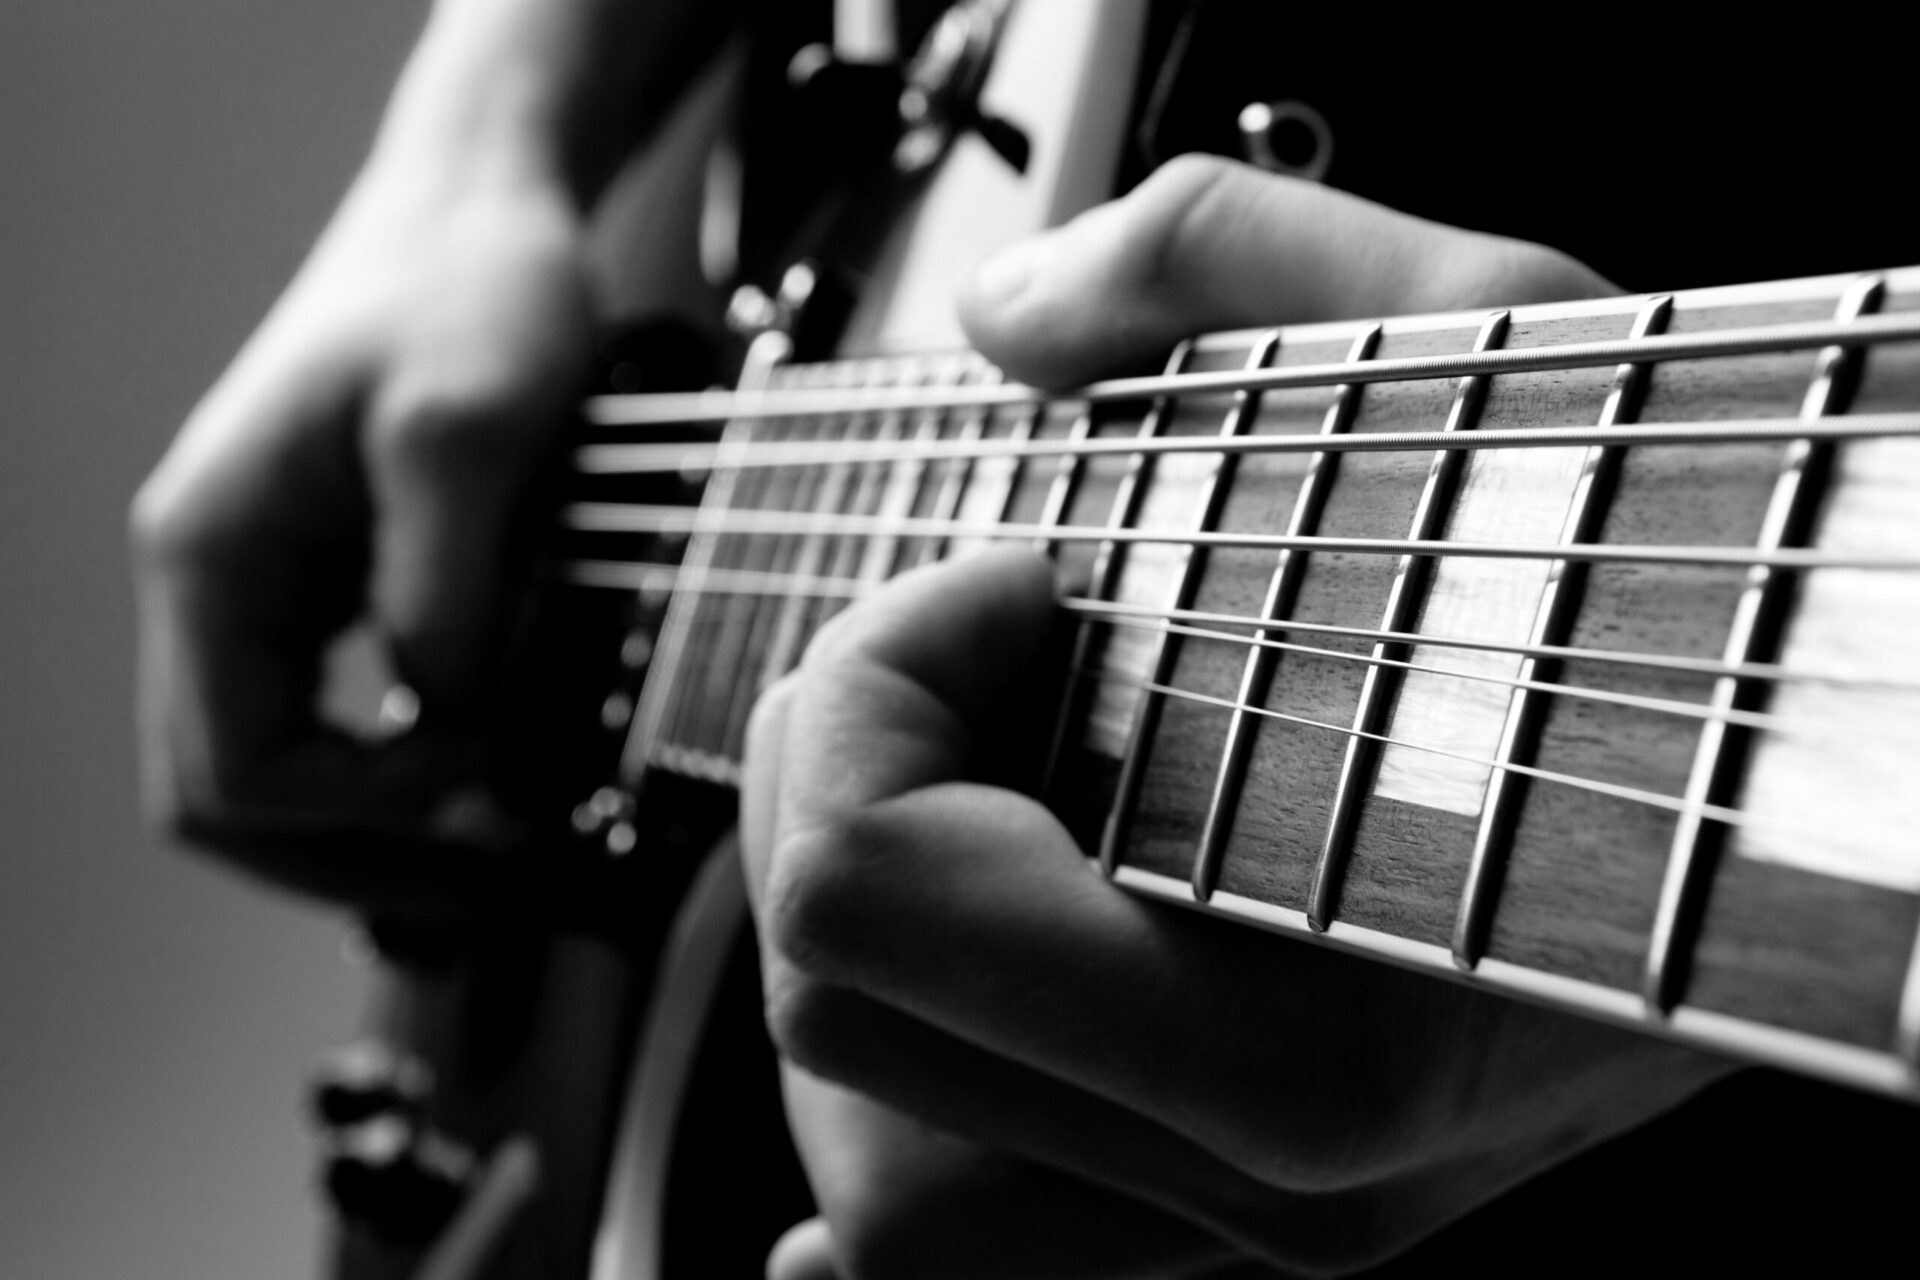 An Experience Day capturing someone playing an electric guitar in a black and white photograph.